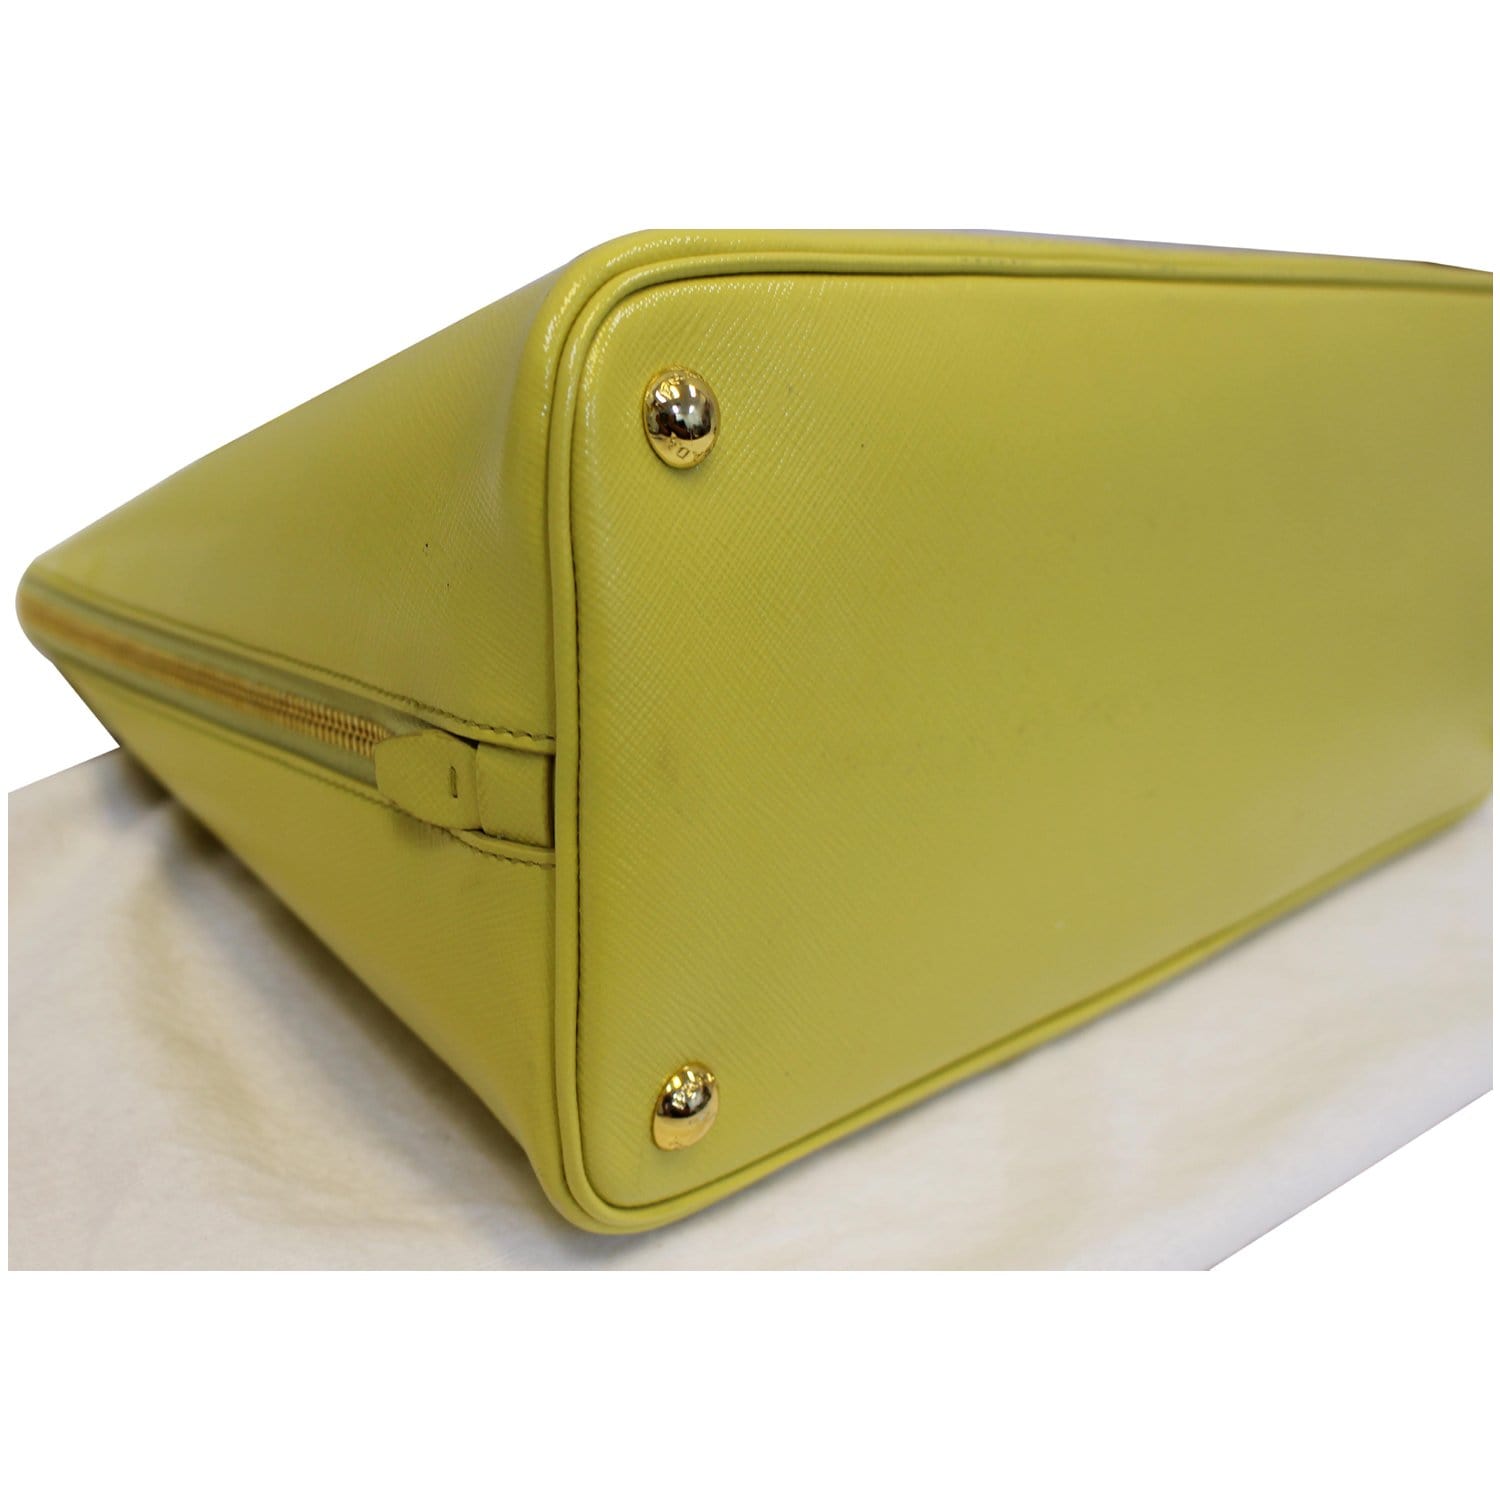 Sunny Yellow Saffiano Leather Top-handle Bag